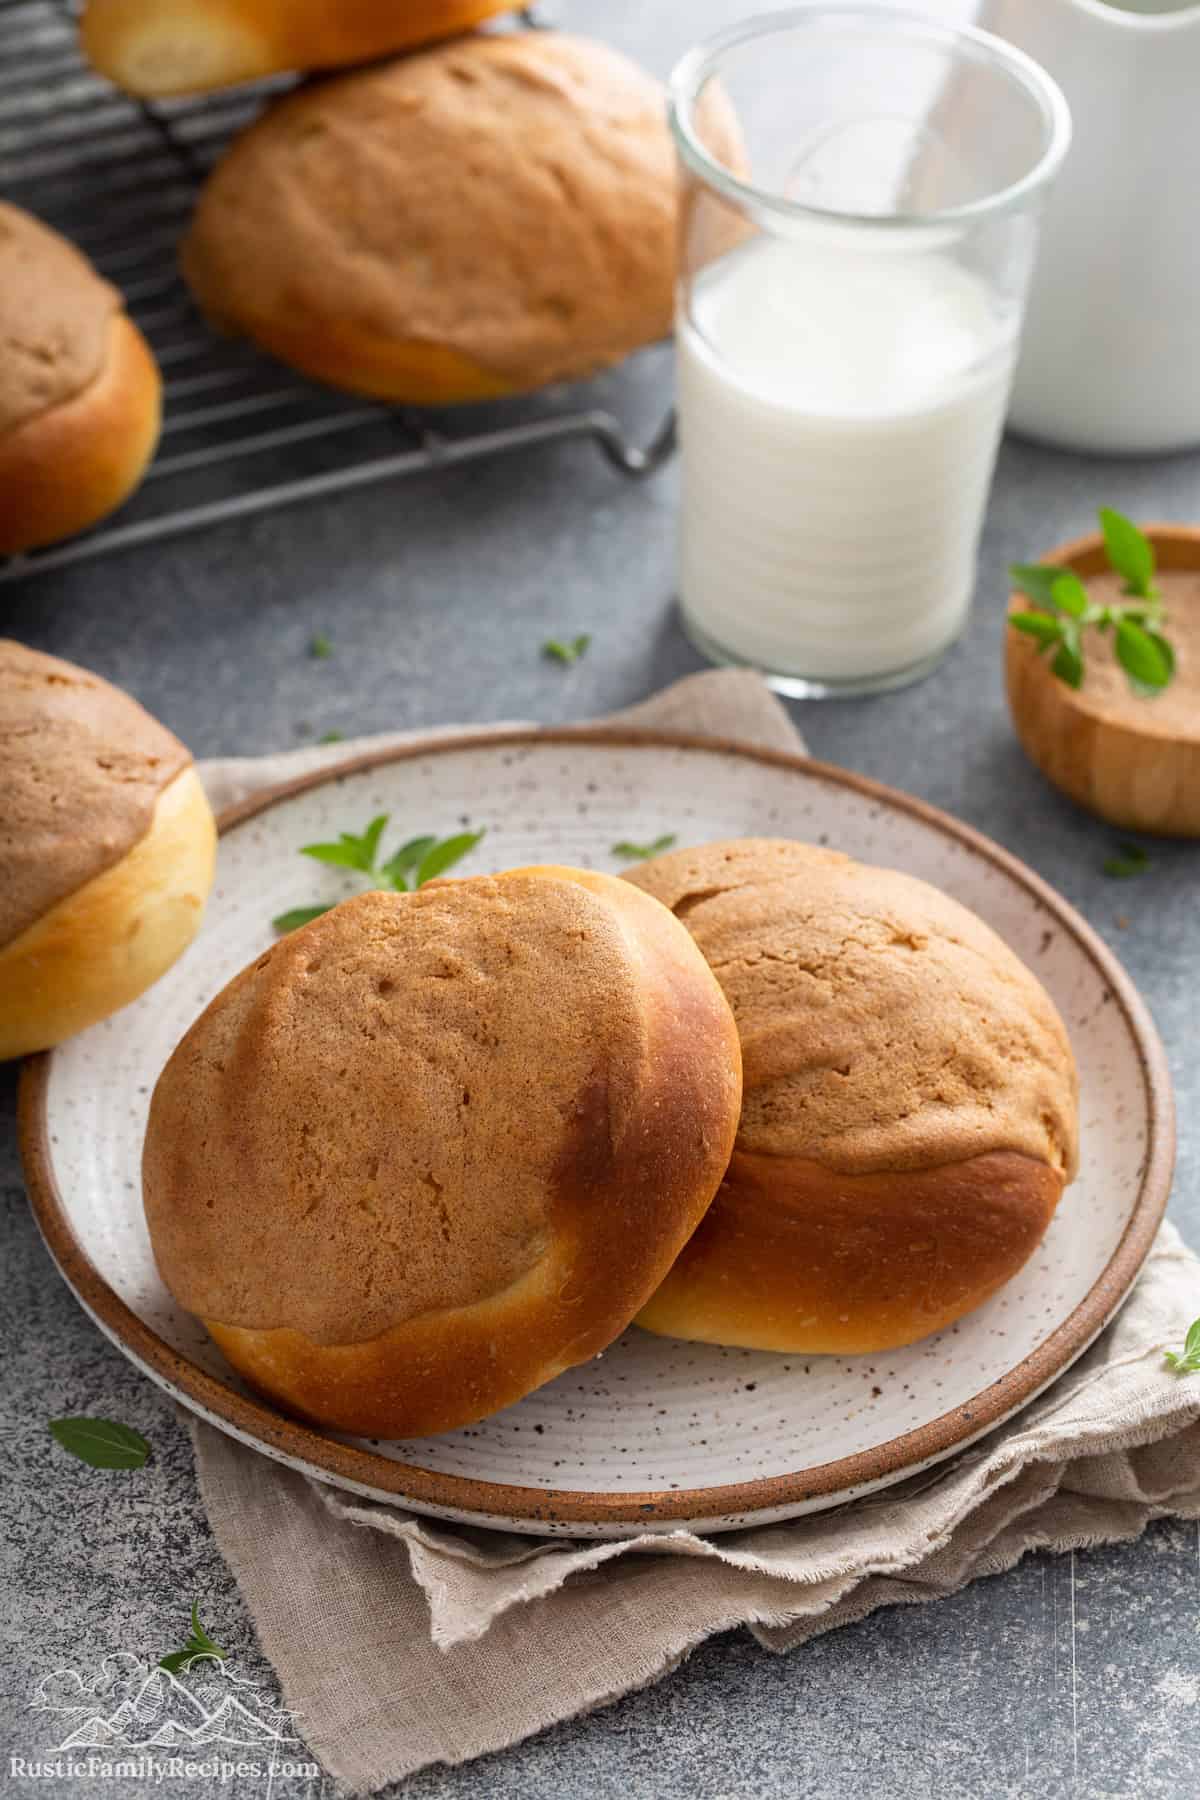 Two Mexican morning buns on a plate, with more buns cooling on rack in background